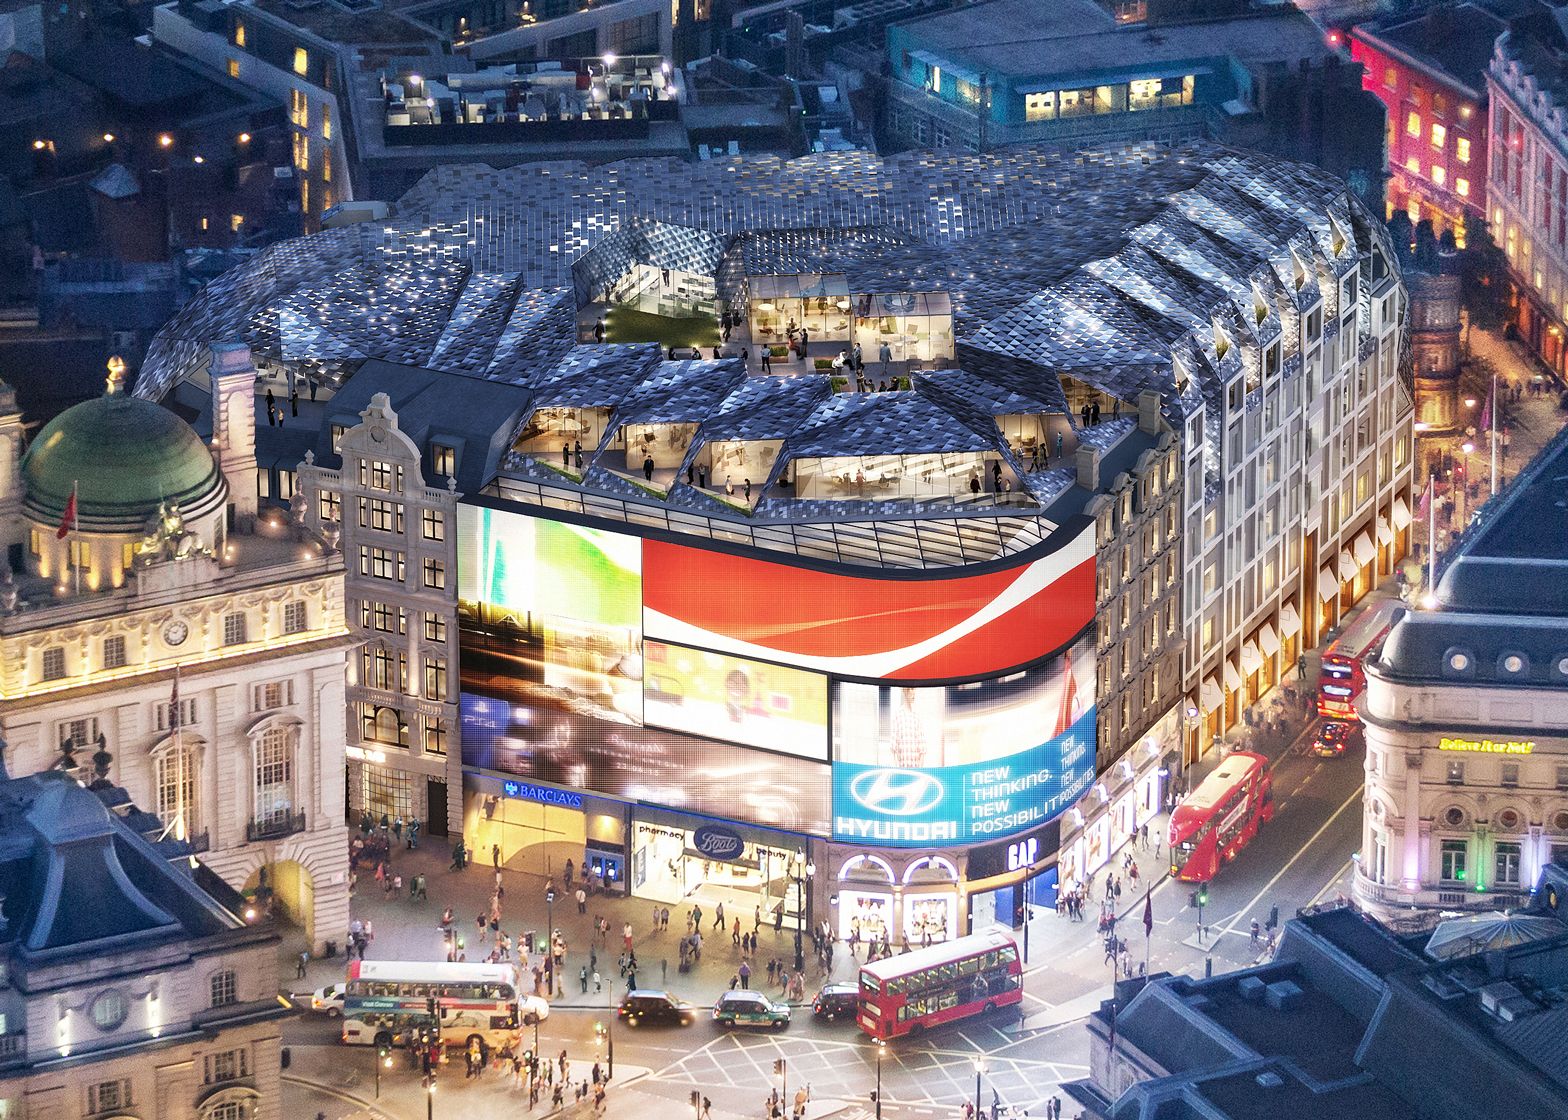 15- Piccadilly Circus